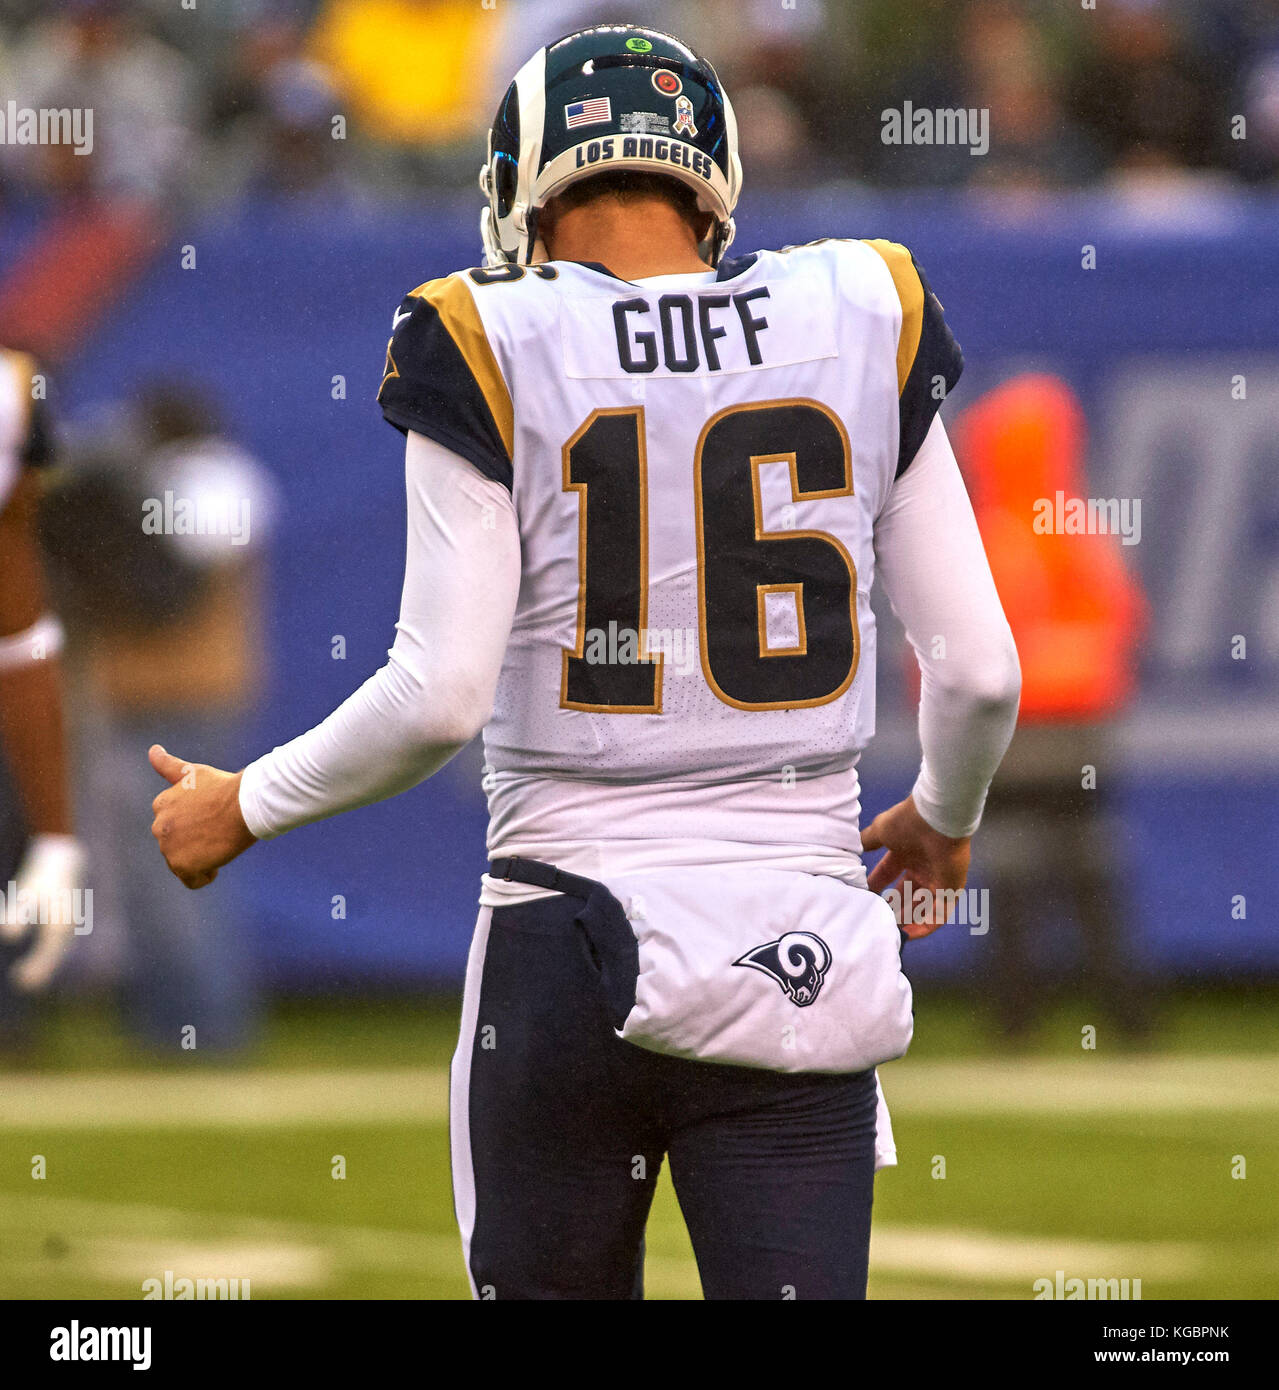 rams jersey goff